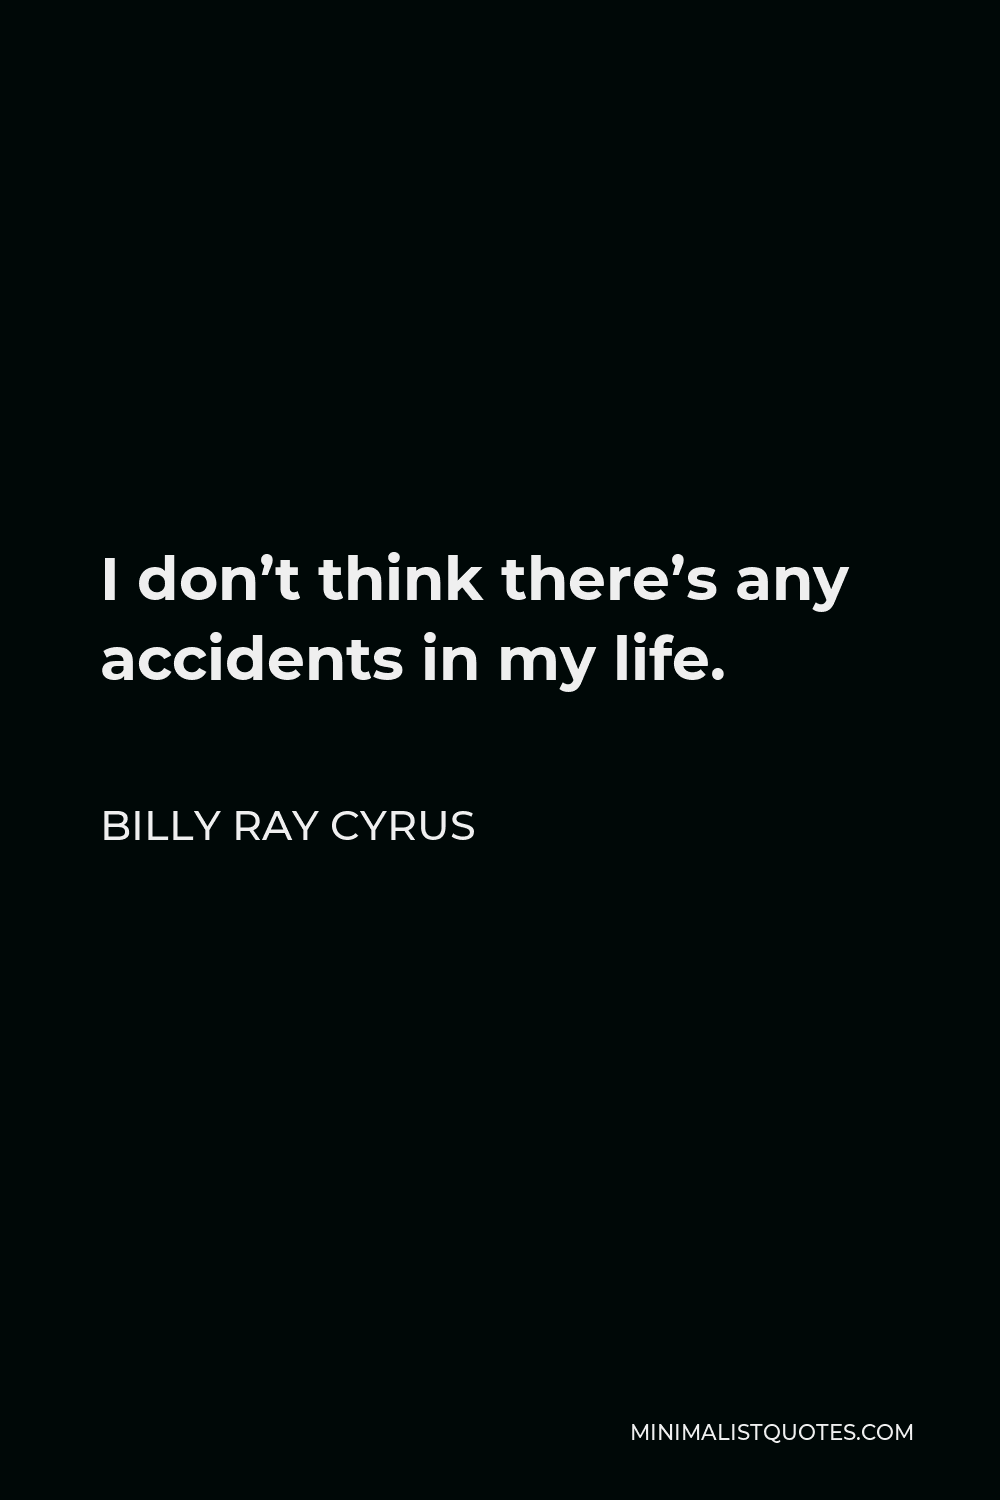 Billy Ray Cyrus Quote - I don’t think there’s any accidents in my life.